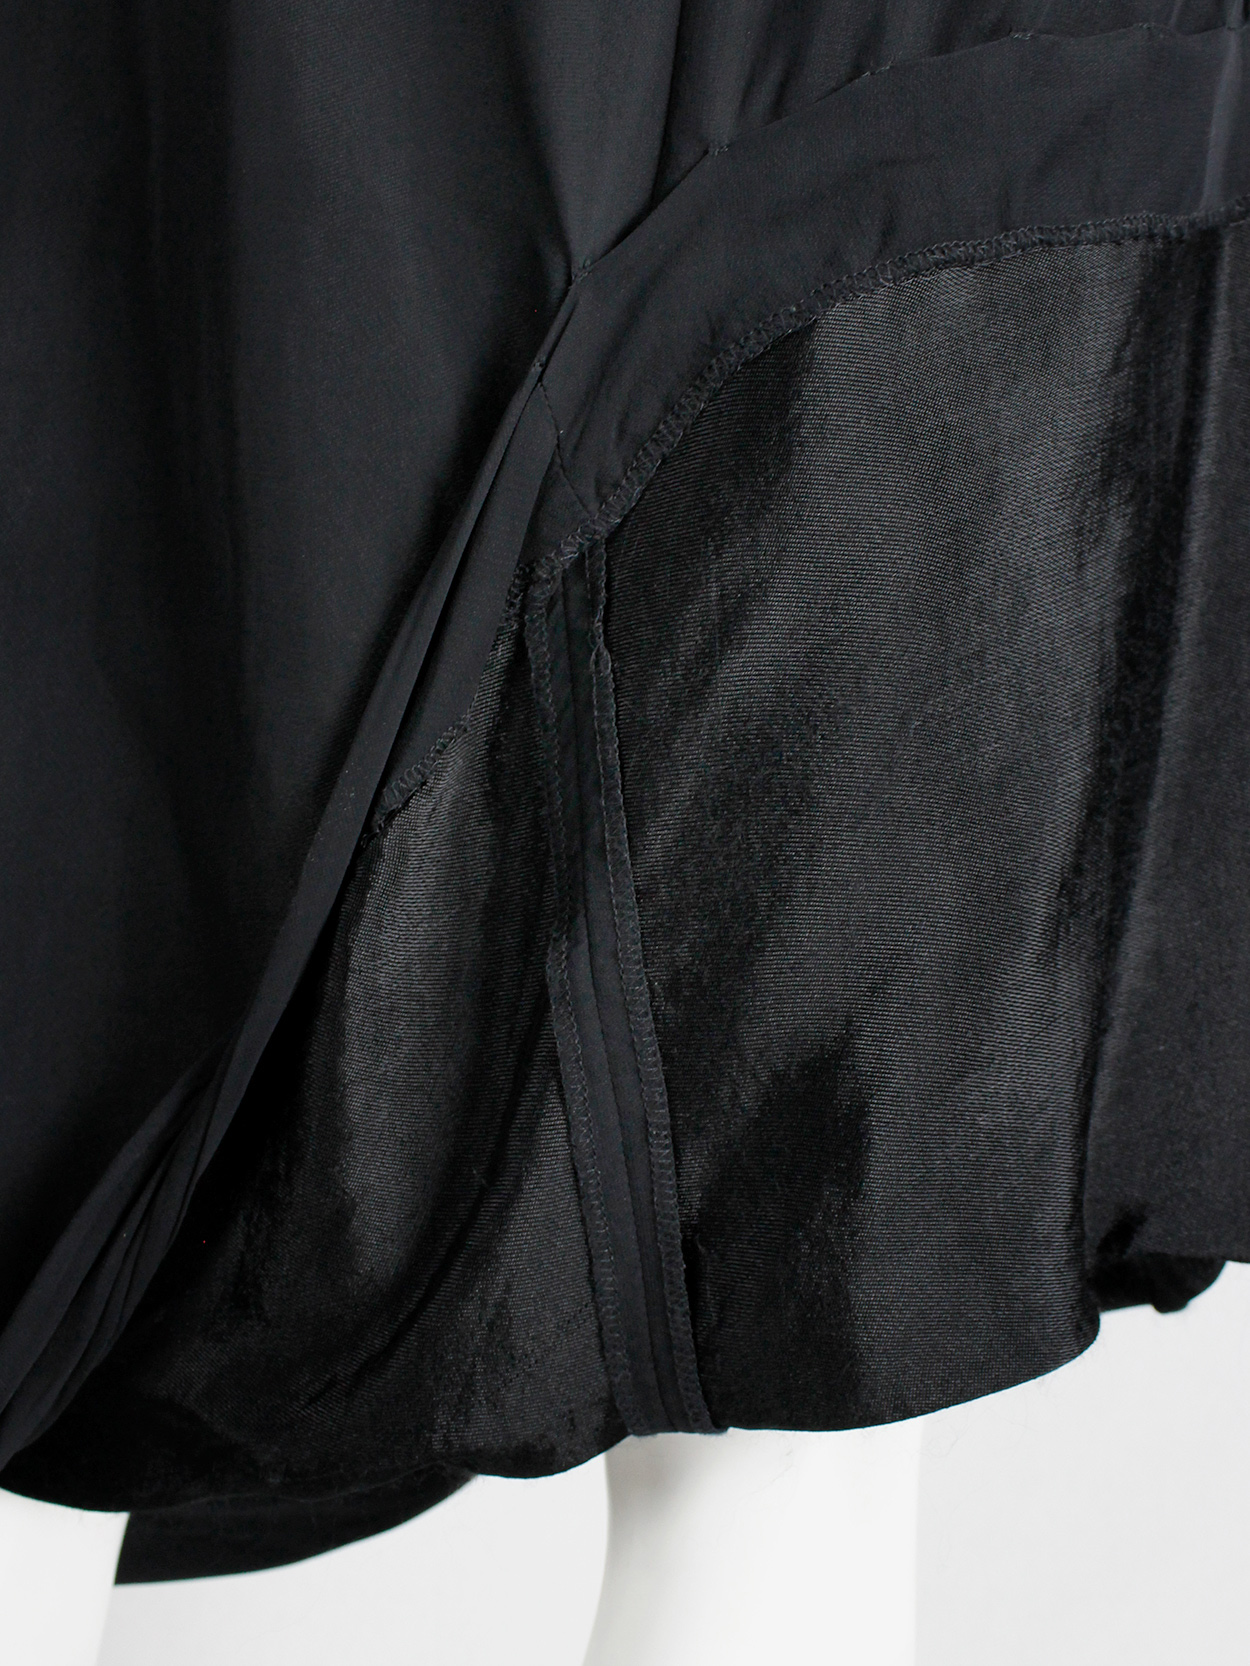 Maison Martin Margiela black partly lifted skirt with exposed lining spring 2003 (1)